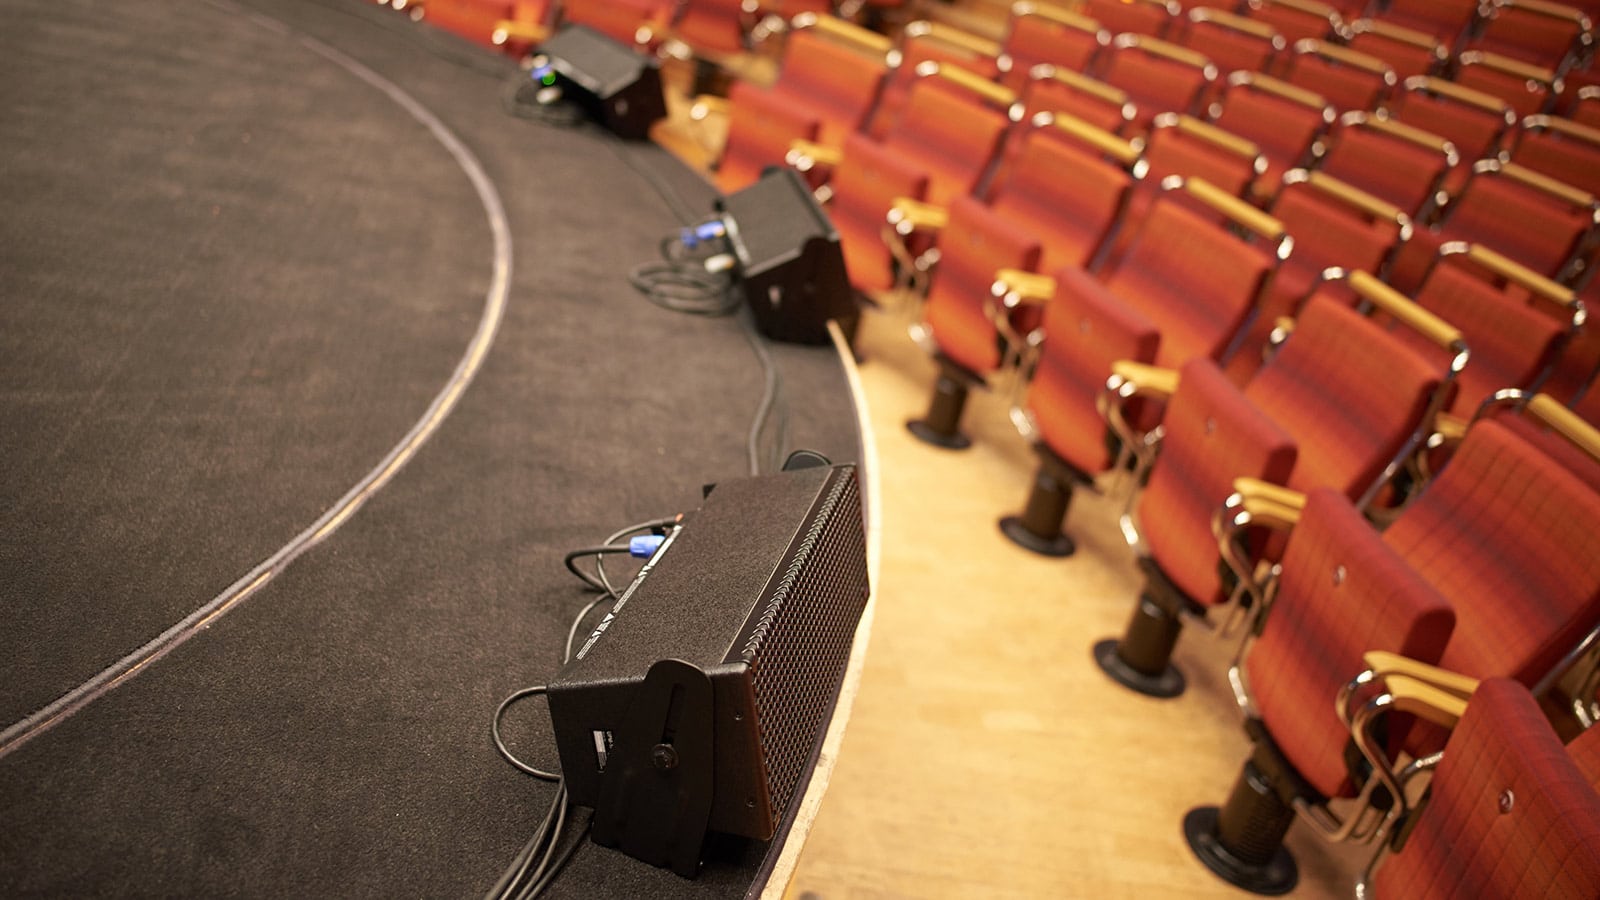 Meyer Sound LEOPARD Brings Power and Transparency to Elite Cologne Philharmonic Hall